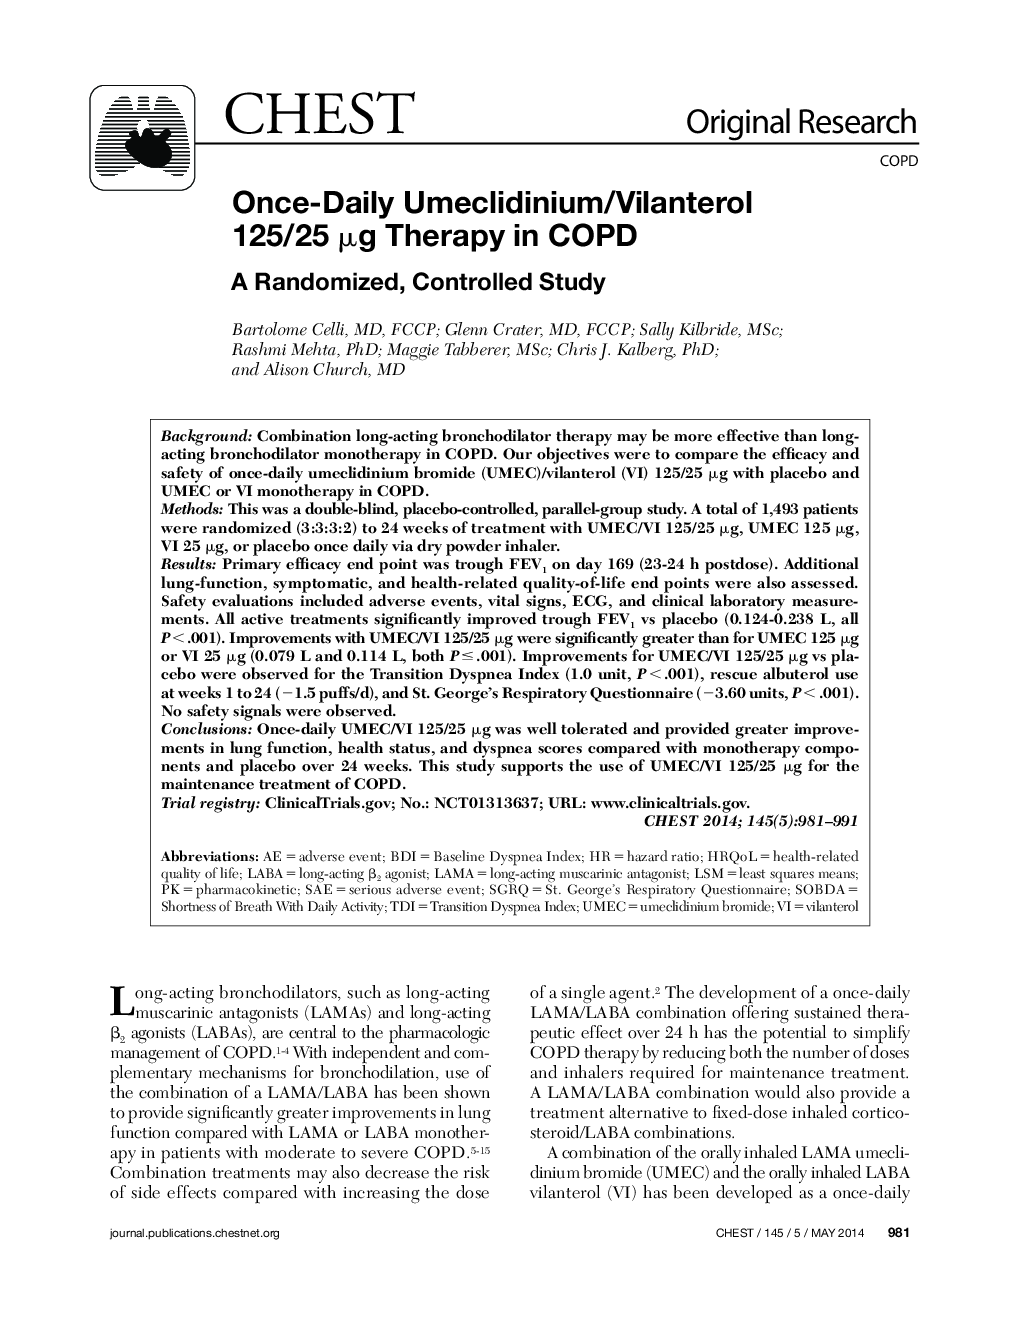 Once-Daily Umeclidinium/Vilanterol 125/25 μg Therapy in COPD : A Randomized, Controlled Study